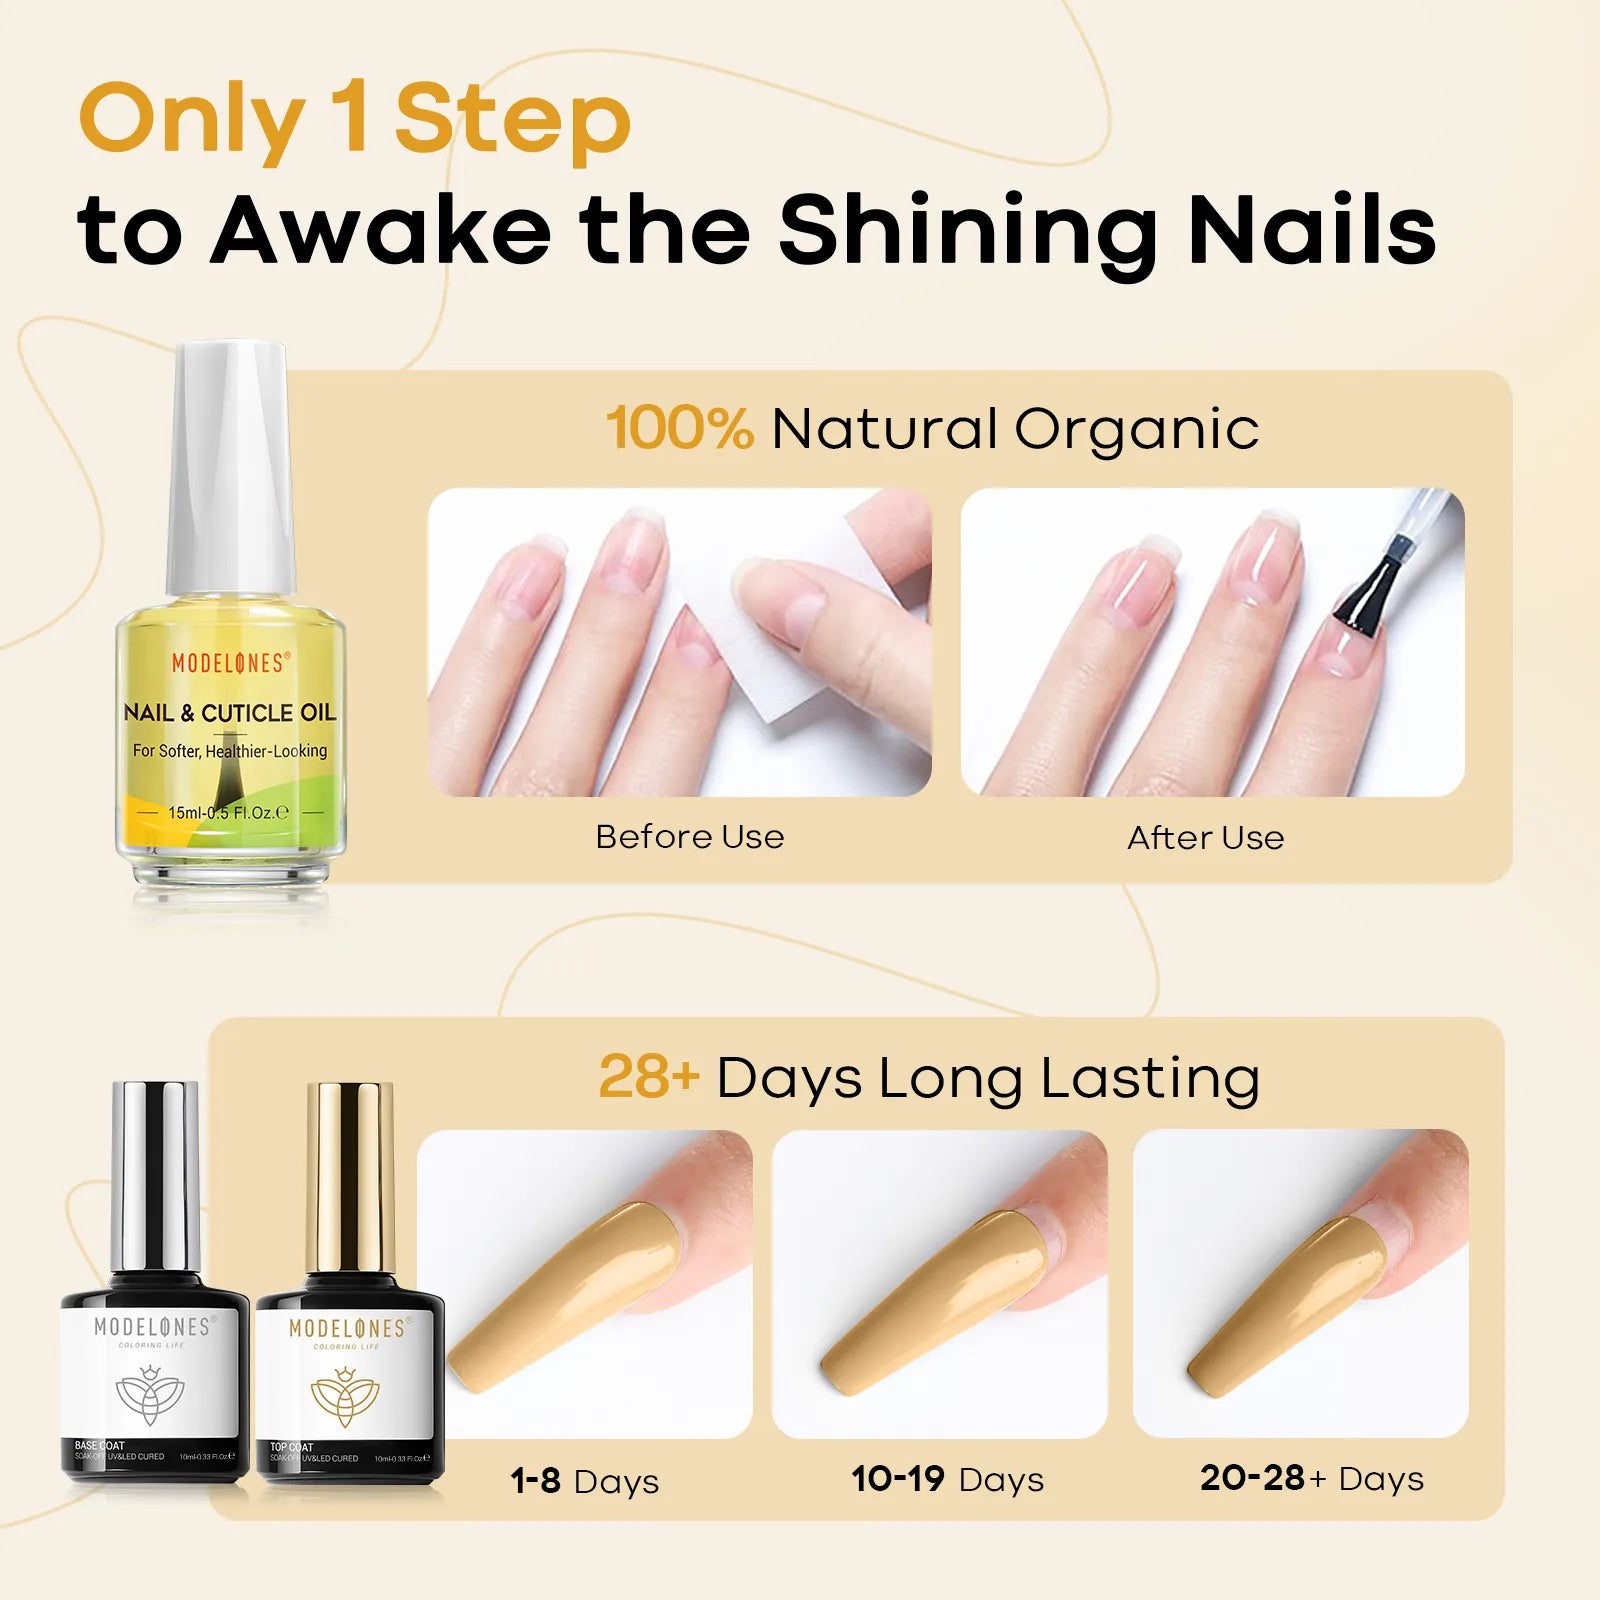 3Pcs Upgraded Cuticle Oil Base&Top Coat Set【US ONLY】